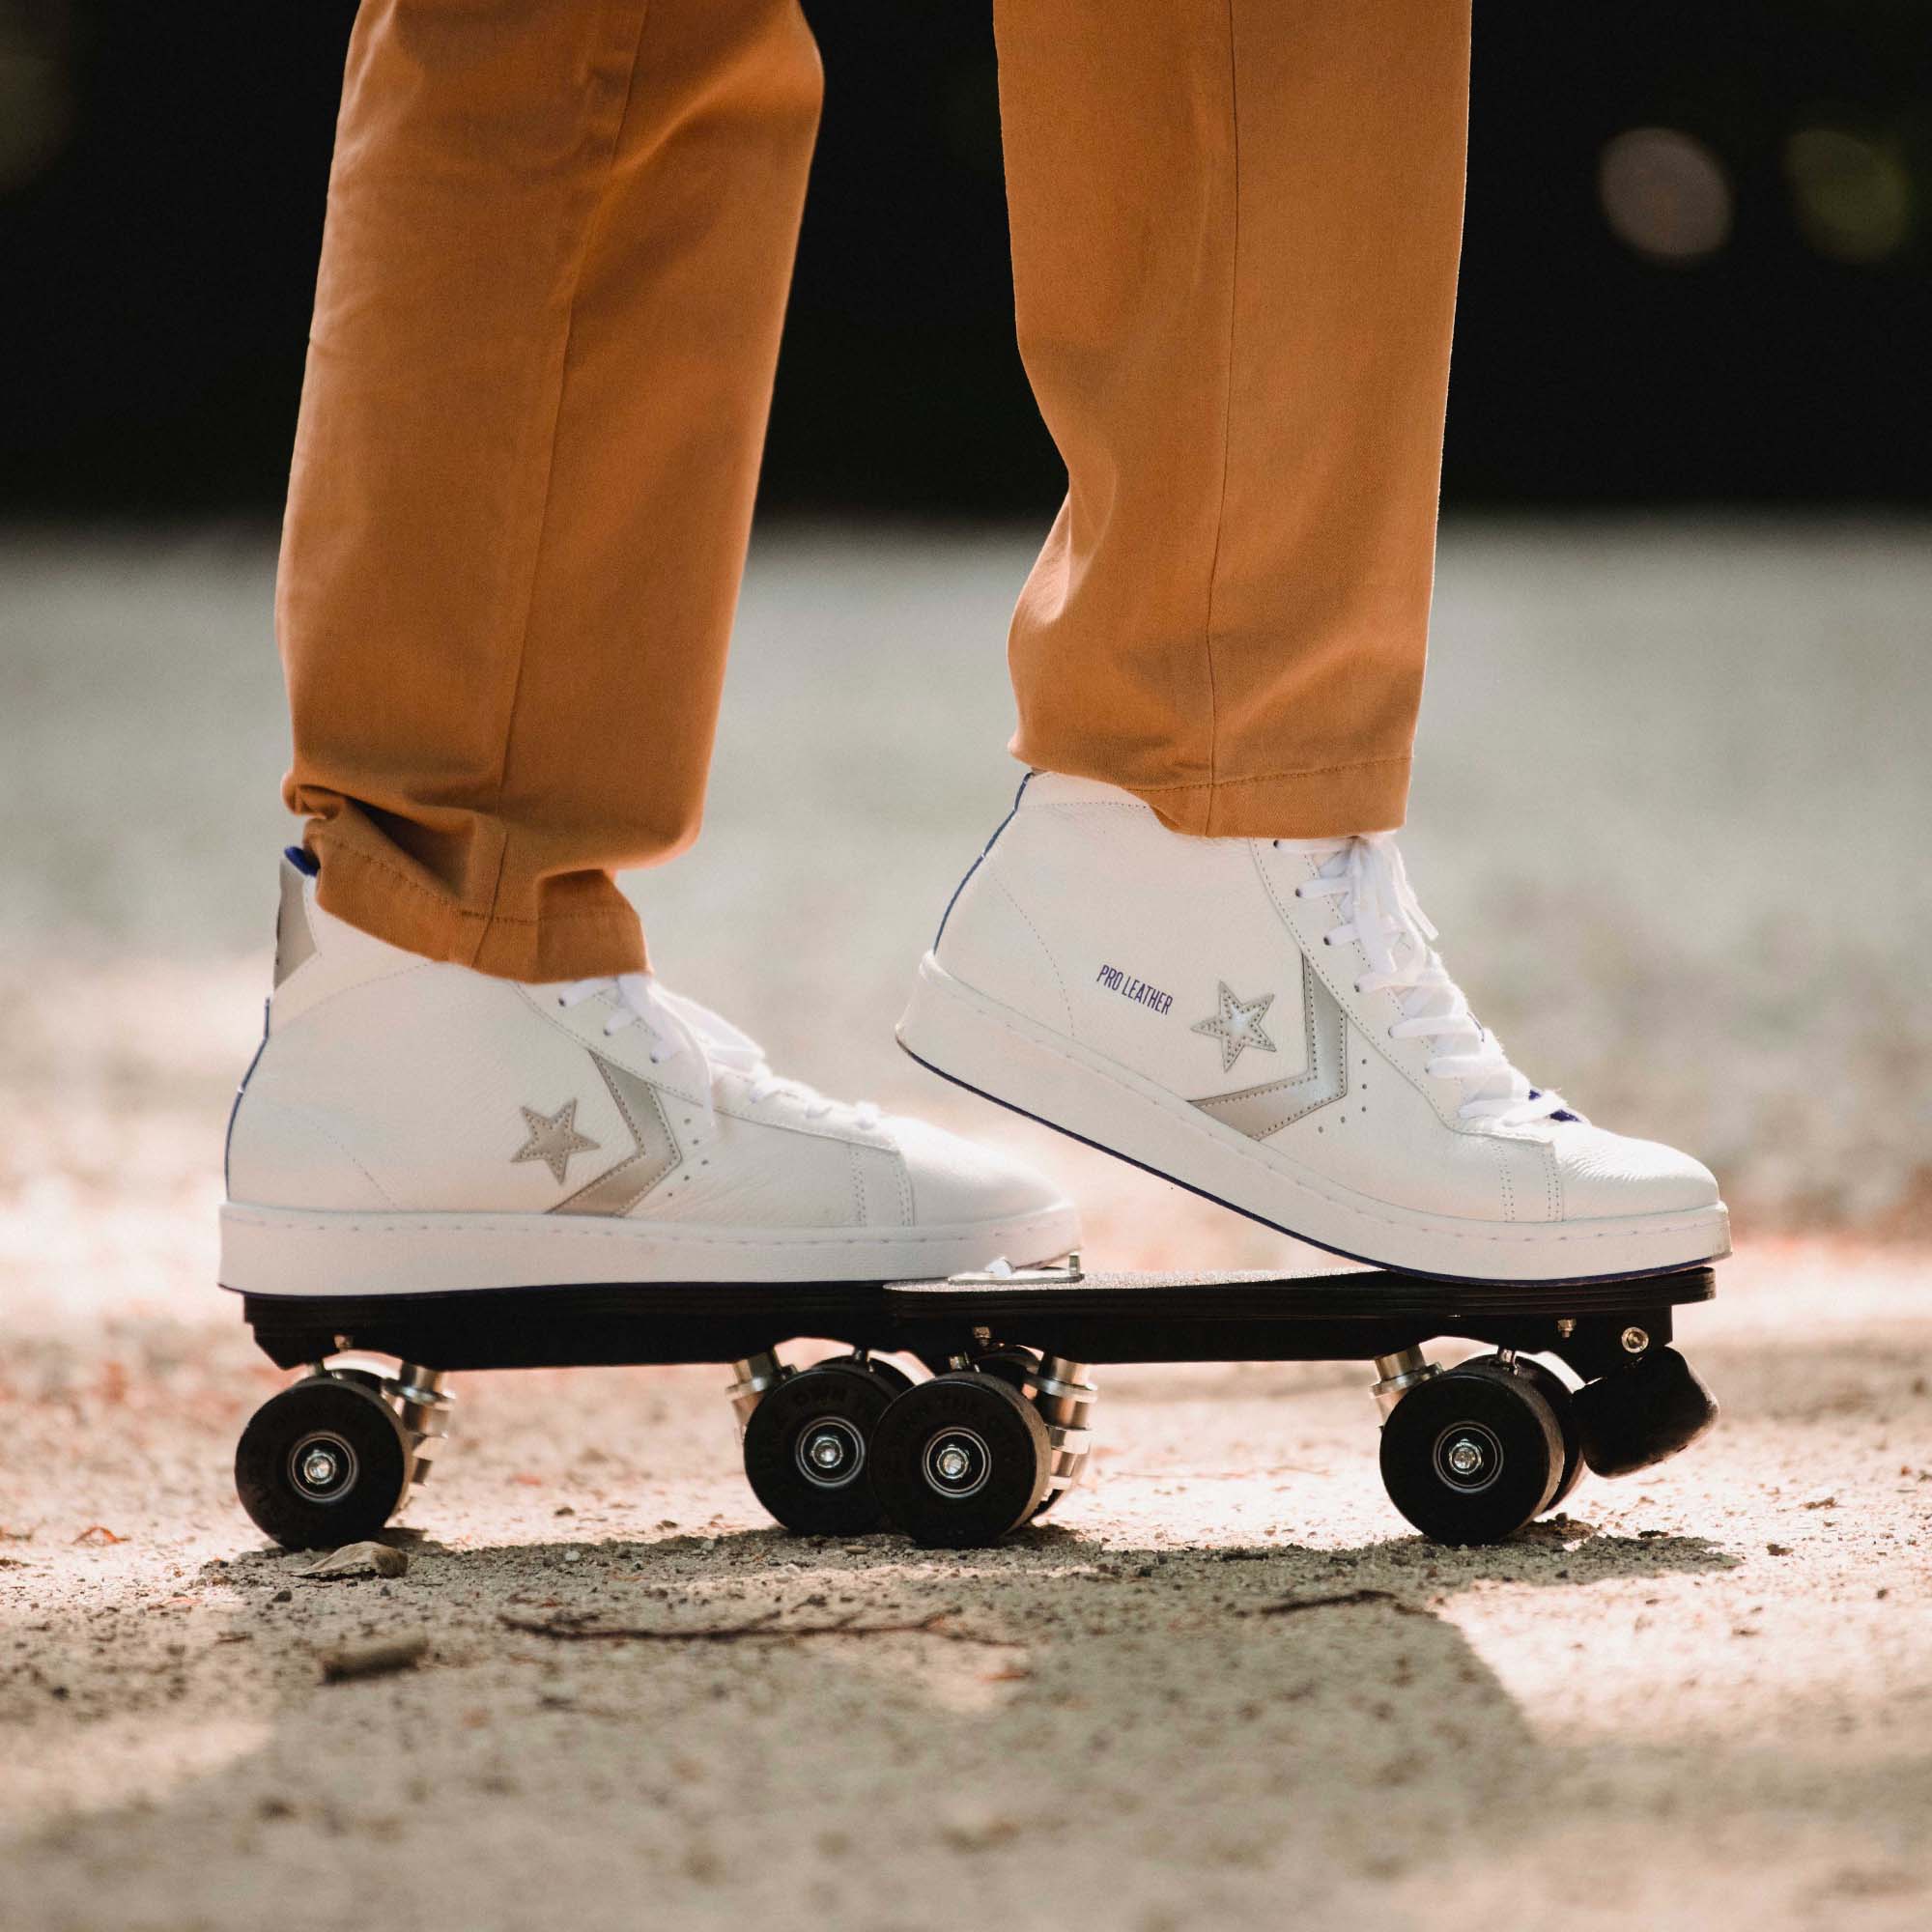 The Converse Pro Reflective White Silver detachable roller skates are being clipped-on